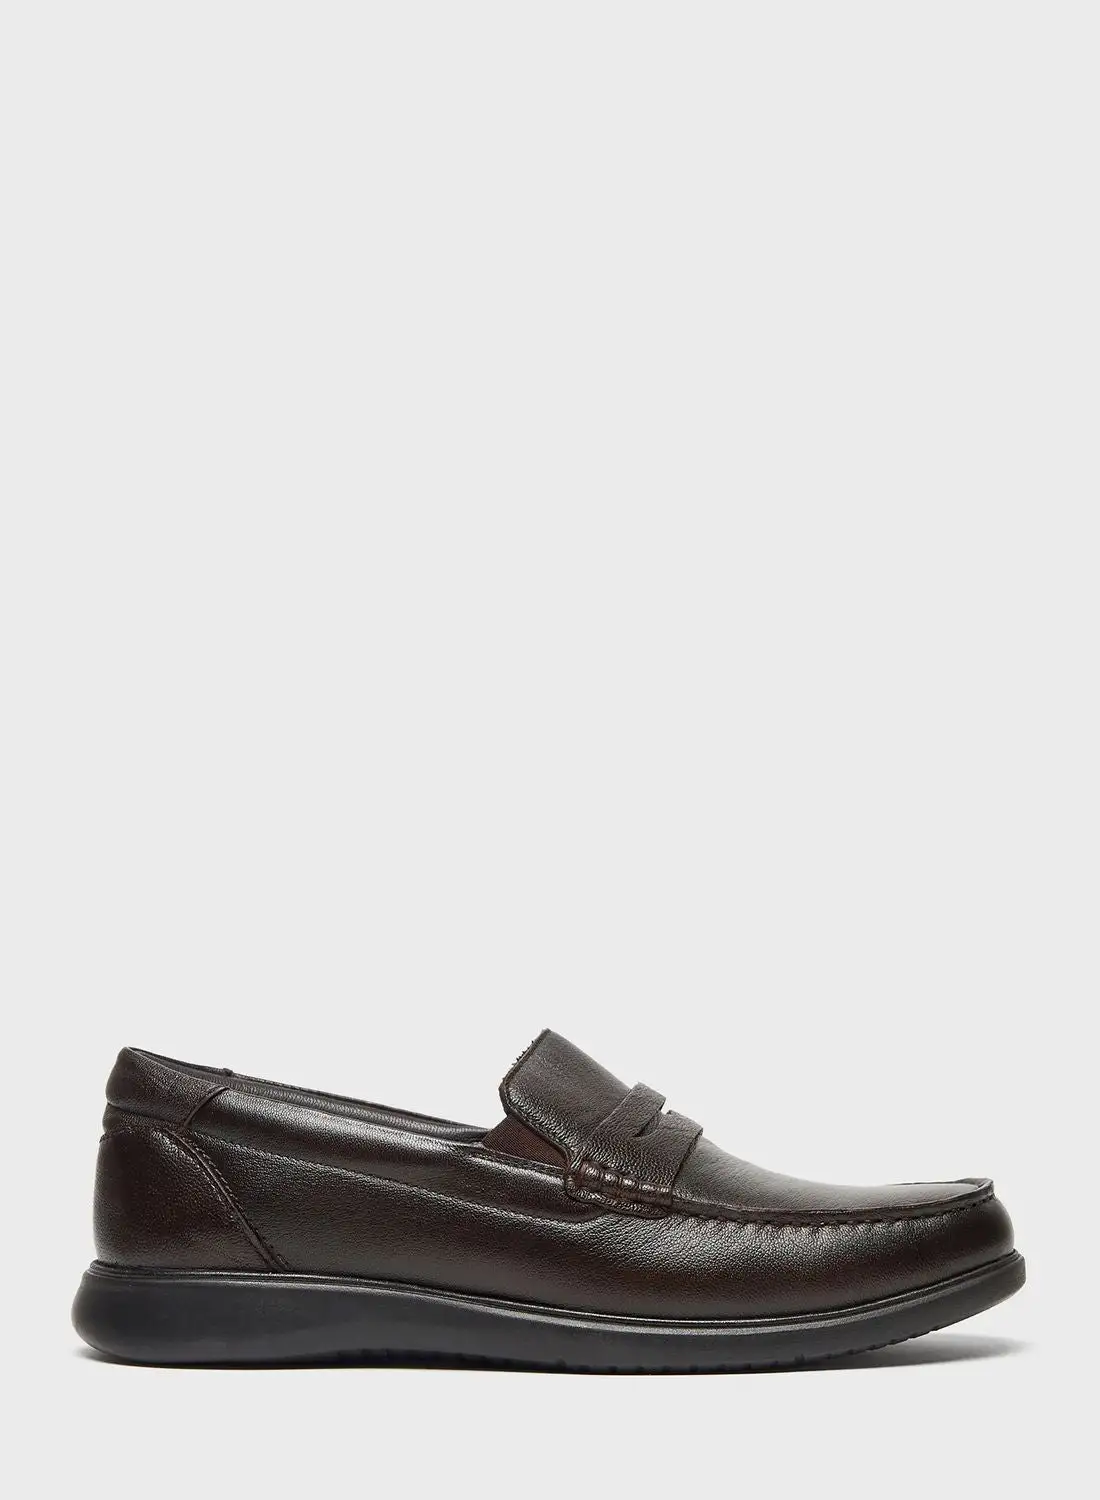 LBL by Shoexpress Formal Slip On Shoes